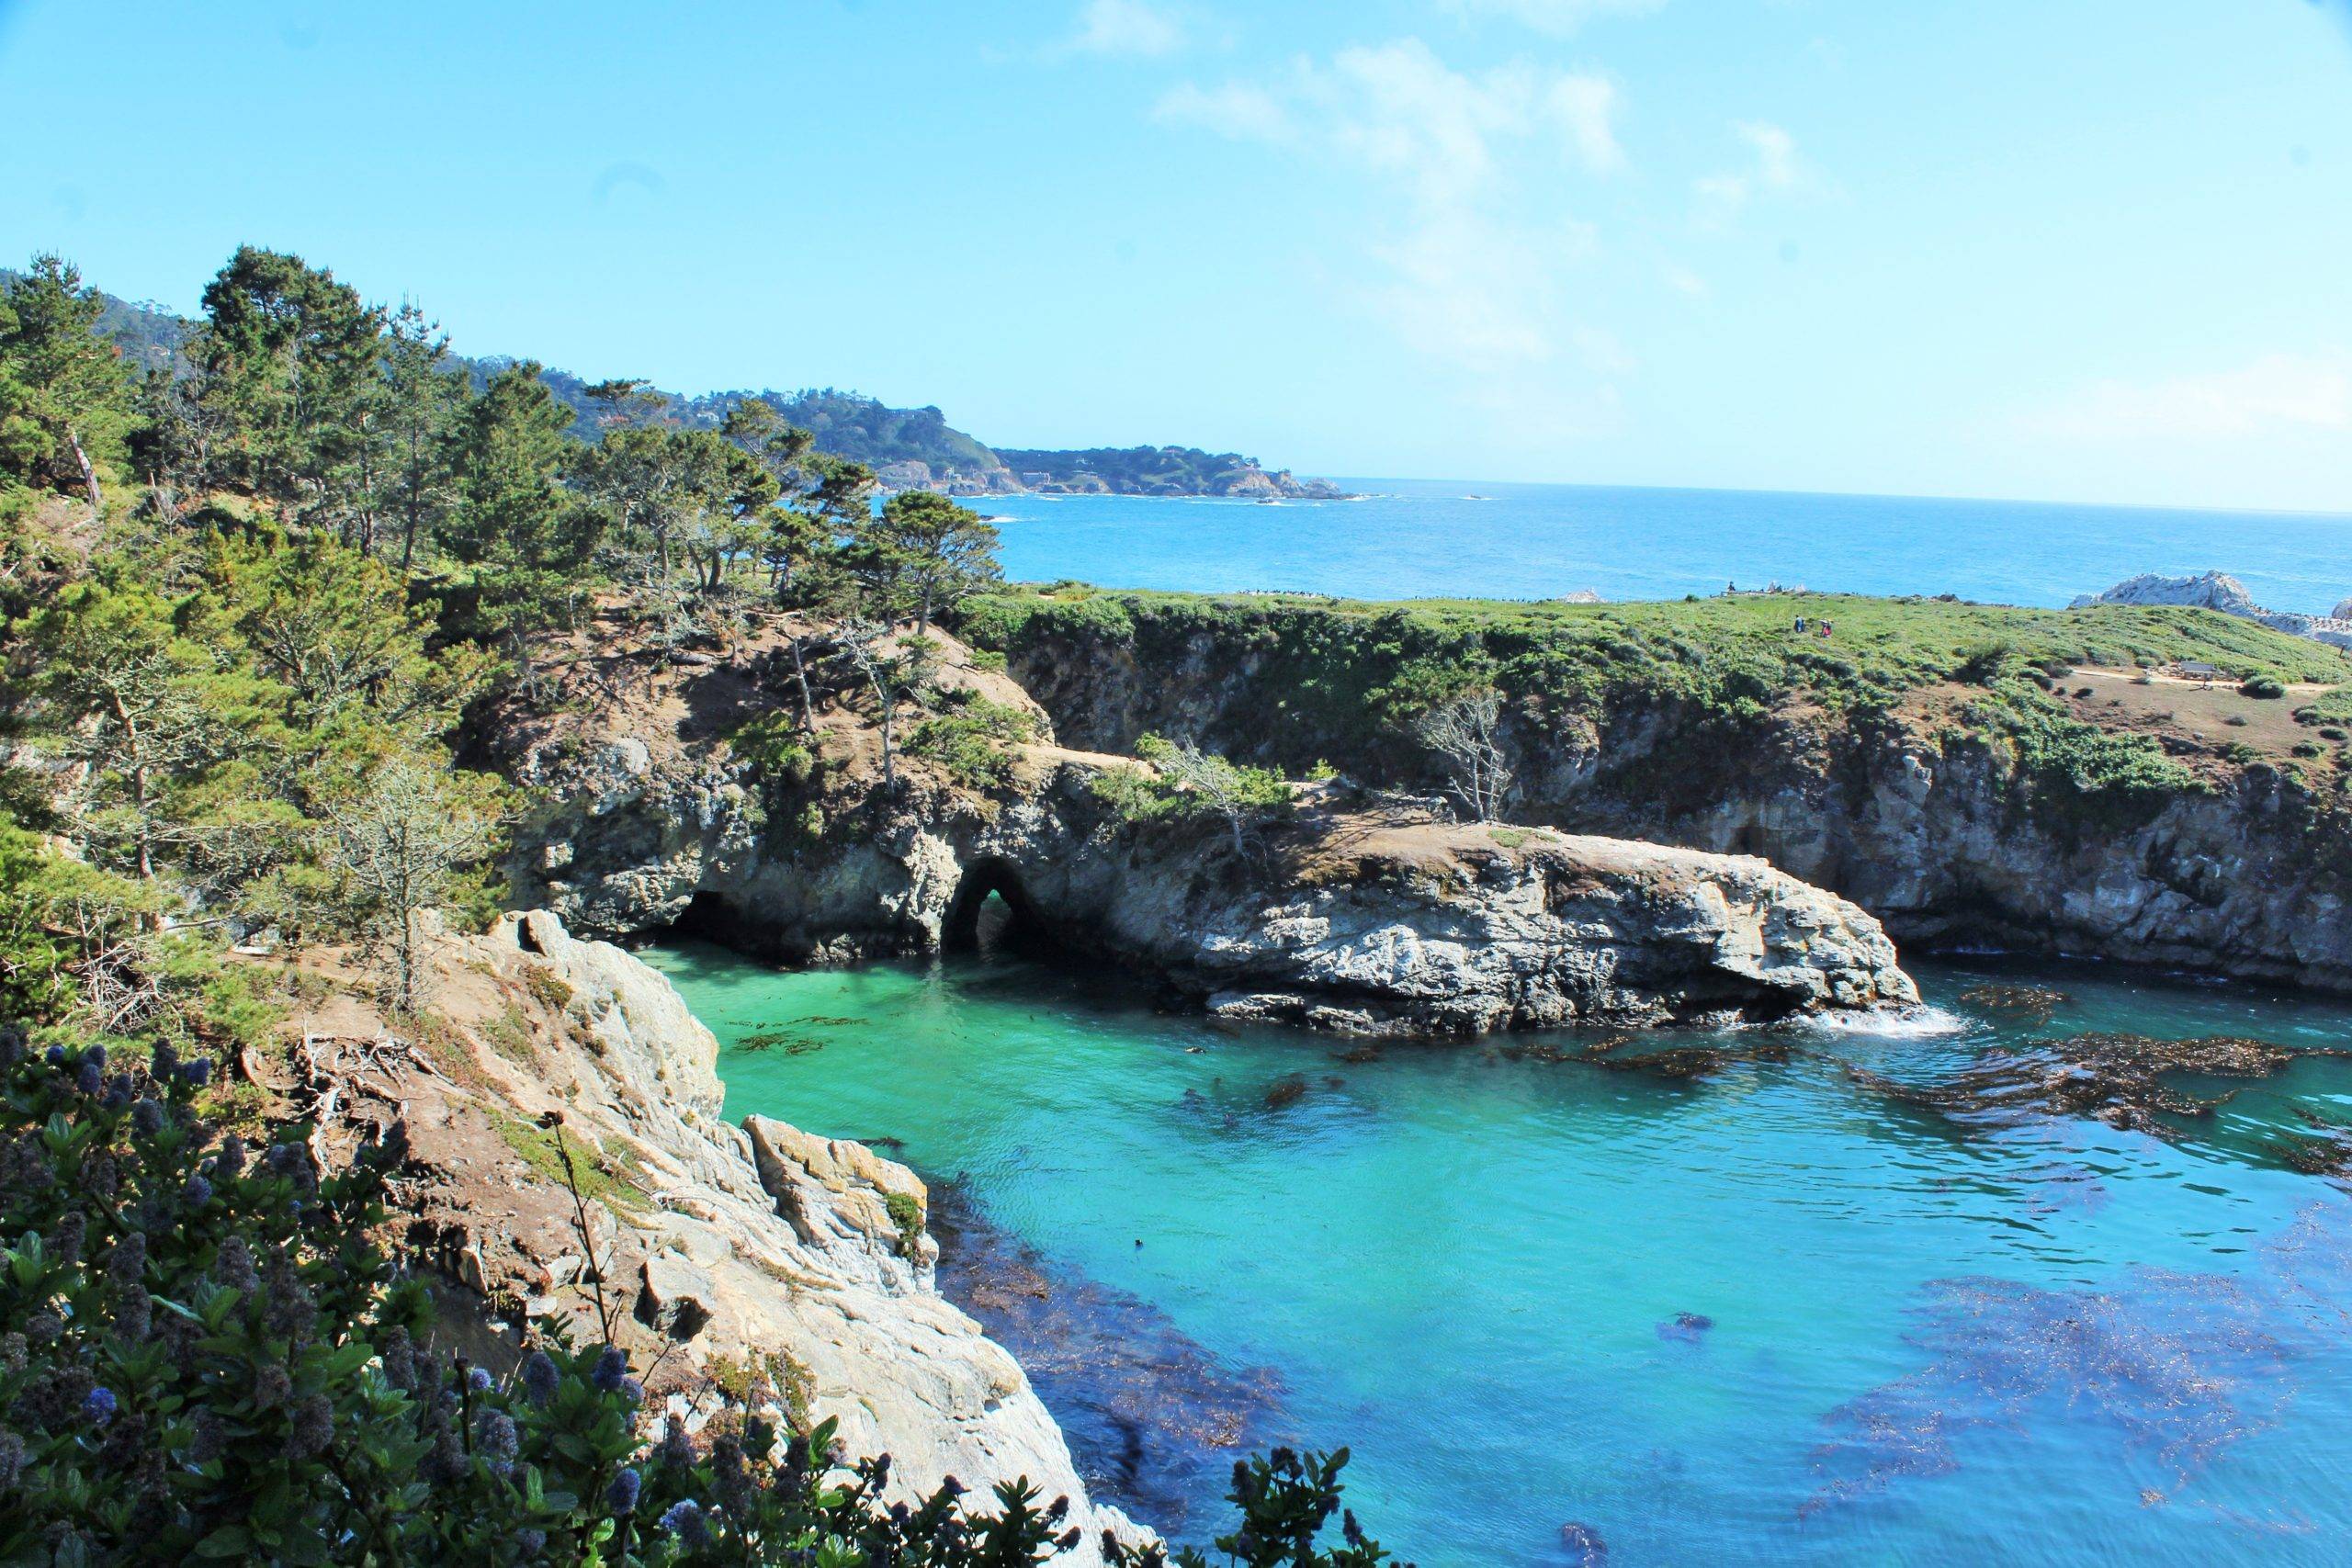 How to Spend the Perfect Day at Point Lobos State Reserve